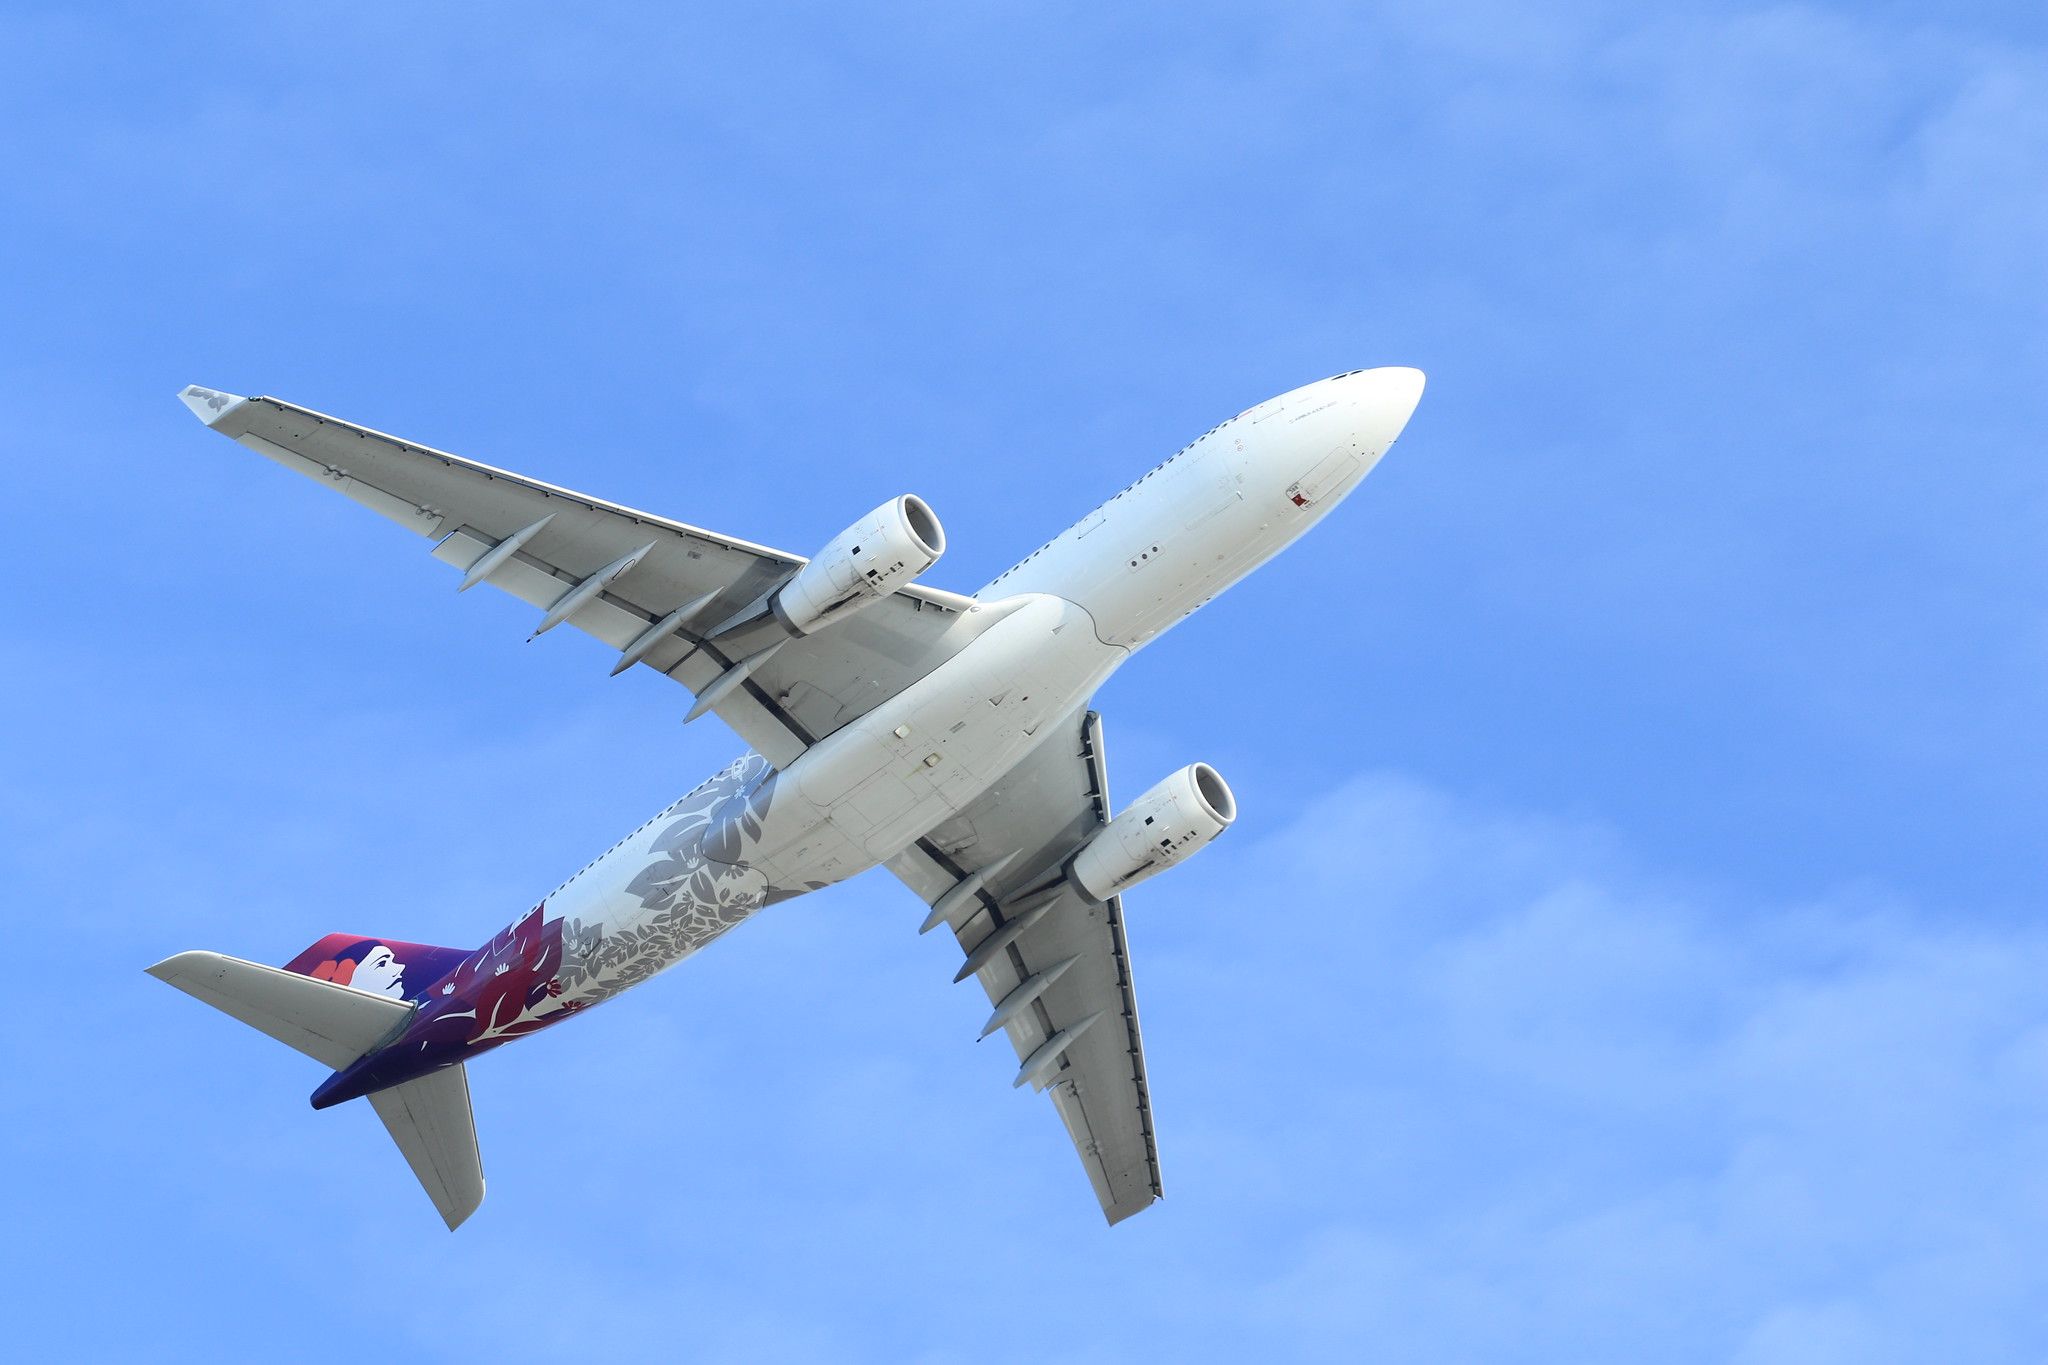 Airbus A330-200 (Hawaiian Airlines) taking off from Portland International Airport